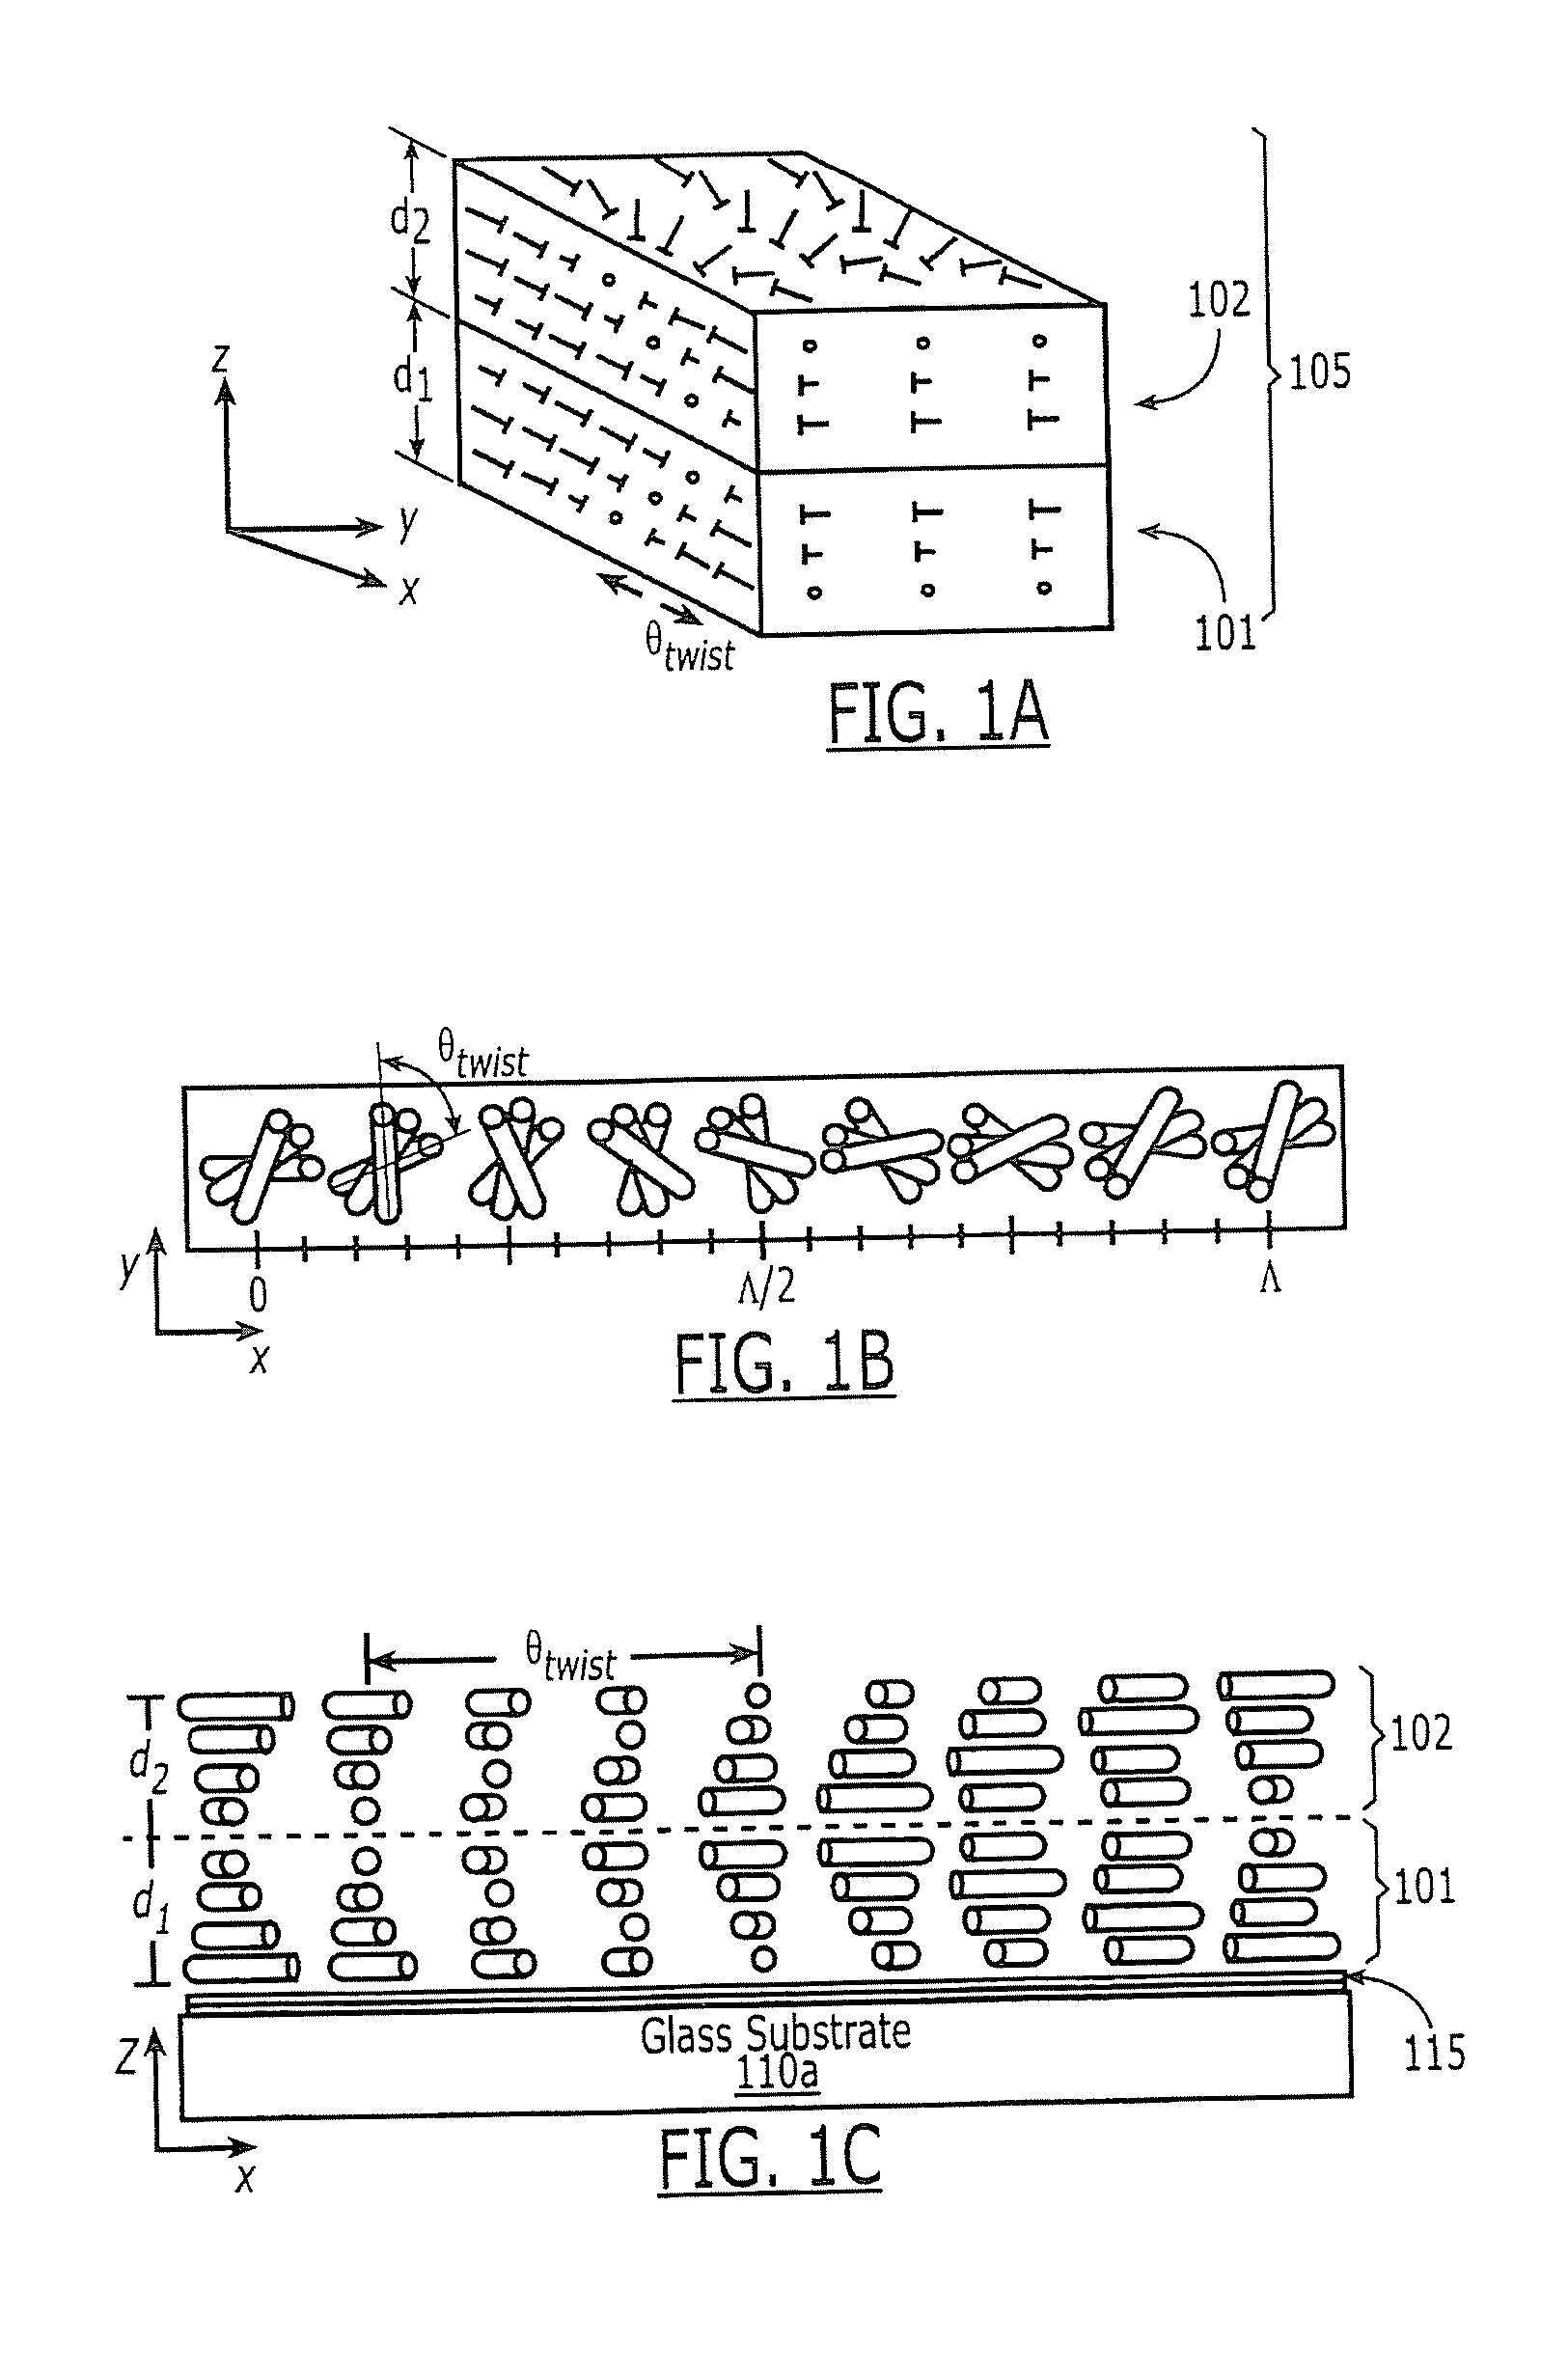 Low-twist chiral liquid crystal polarization gratings and related fabrication methods